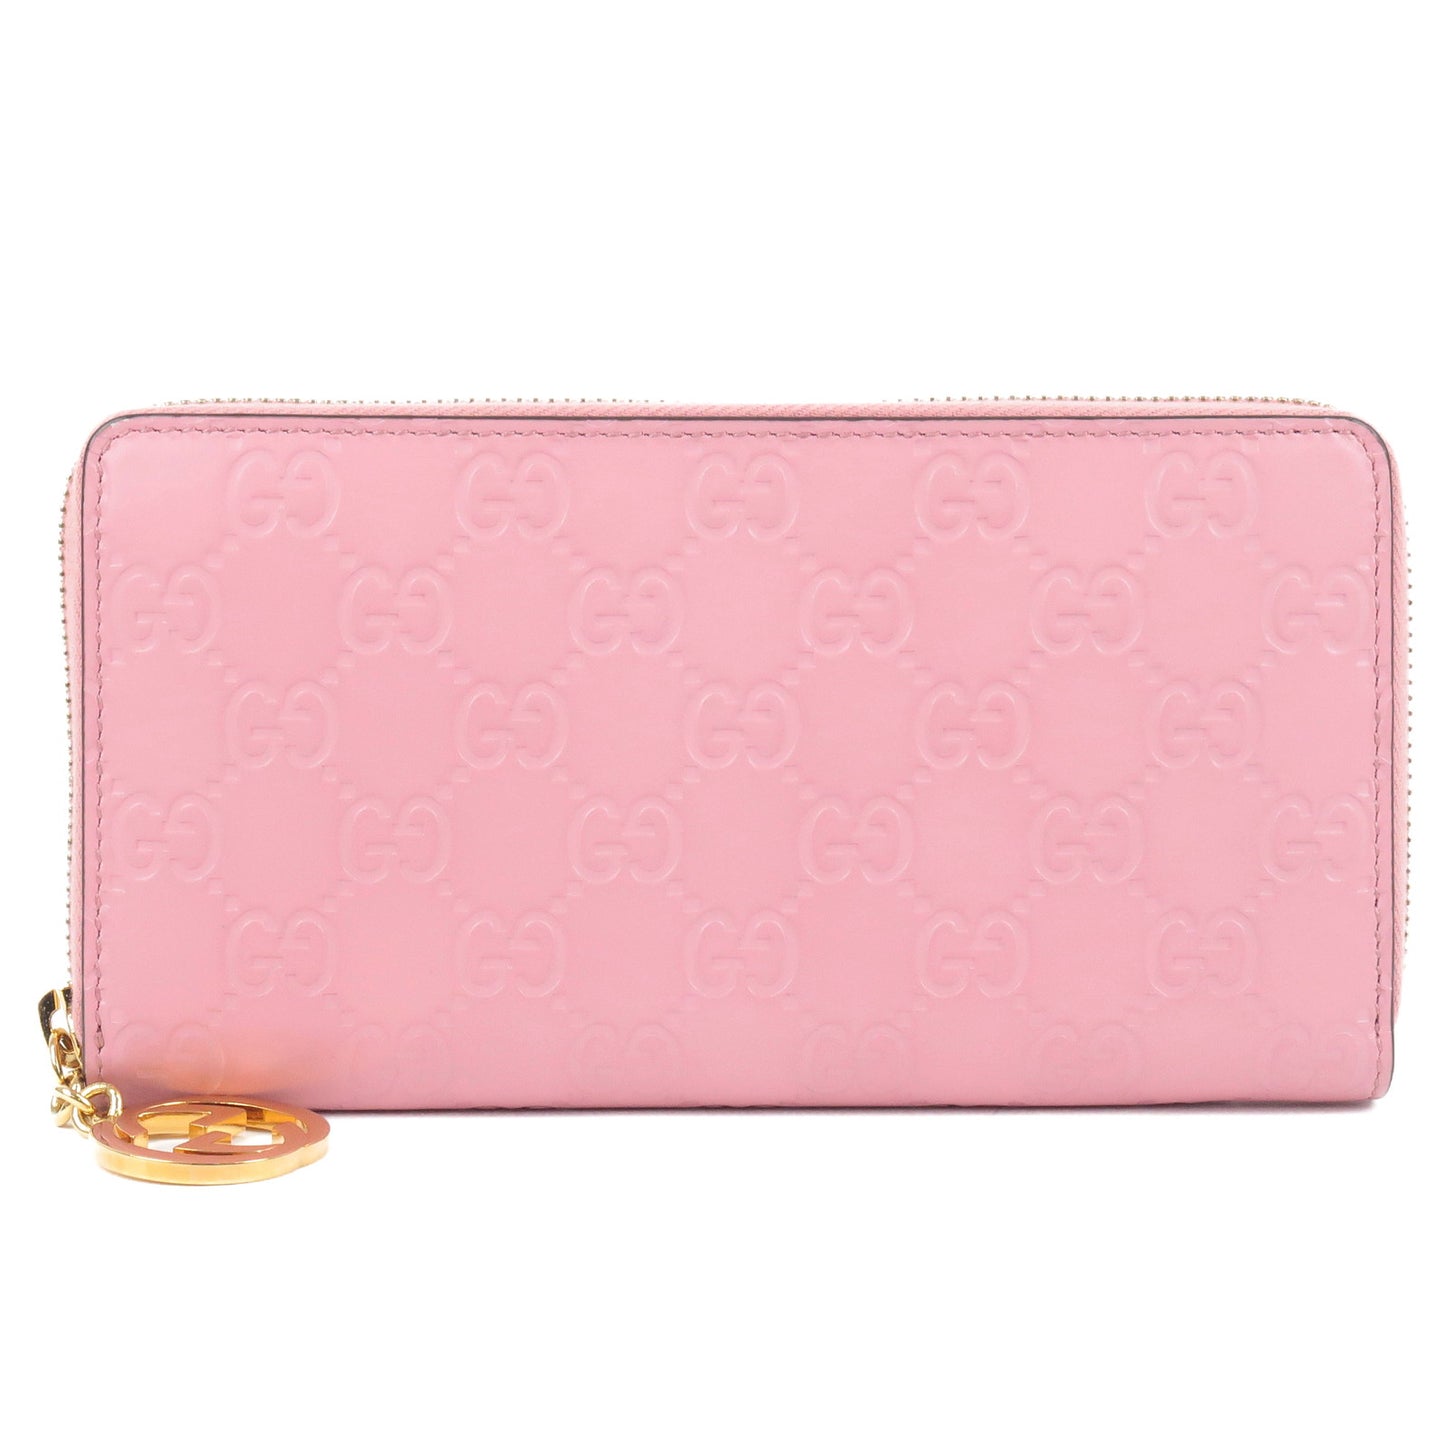 GUCCI-Guccissima-Leather-Round-Zipper-Long-Wallet-Pink-409342